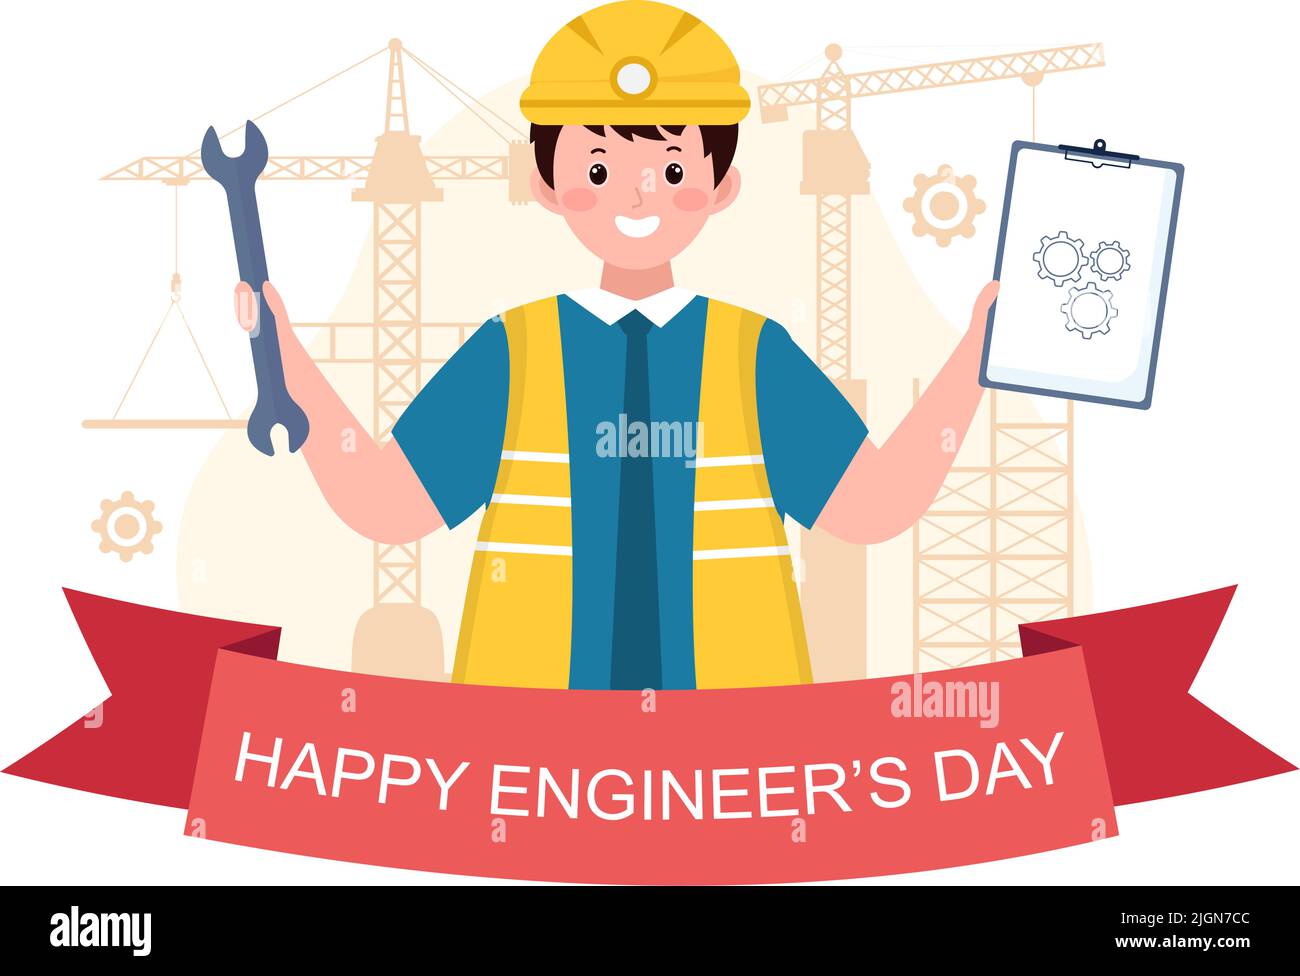 Happy Engineers Day Illustration Commemorative for Engineer with Worker, Helmet and Tools of in Flat Style Cartoon Stock Vector